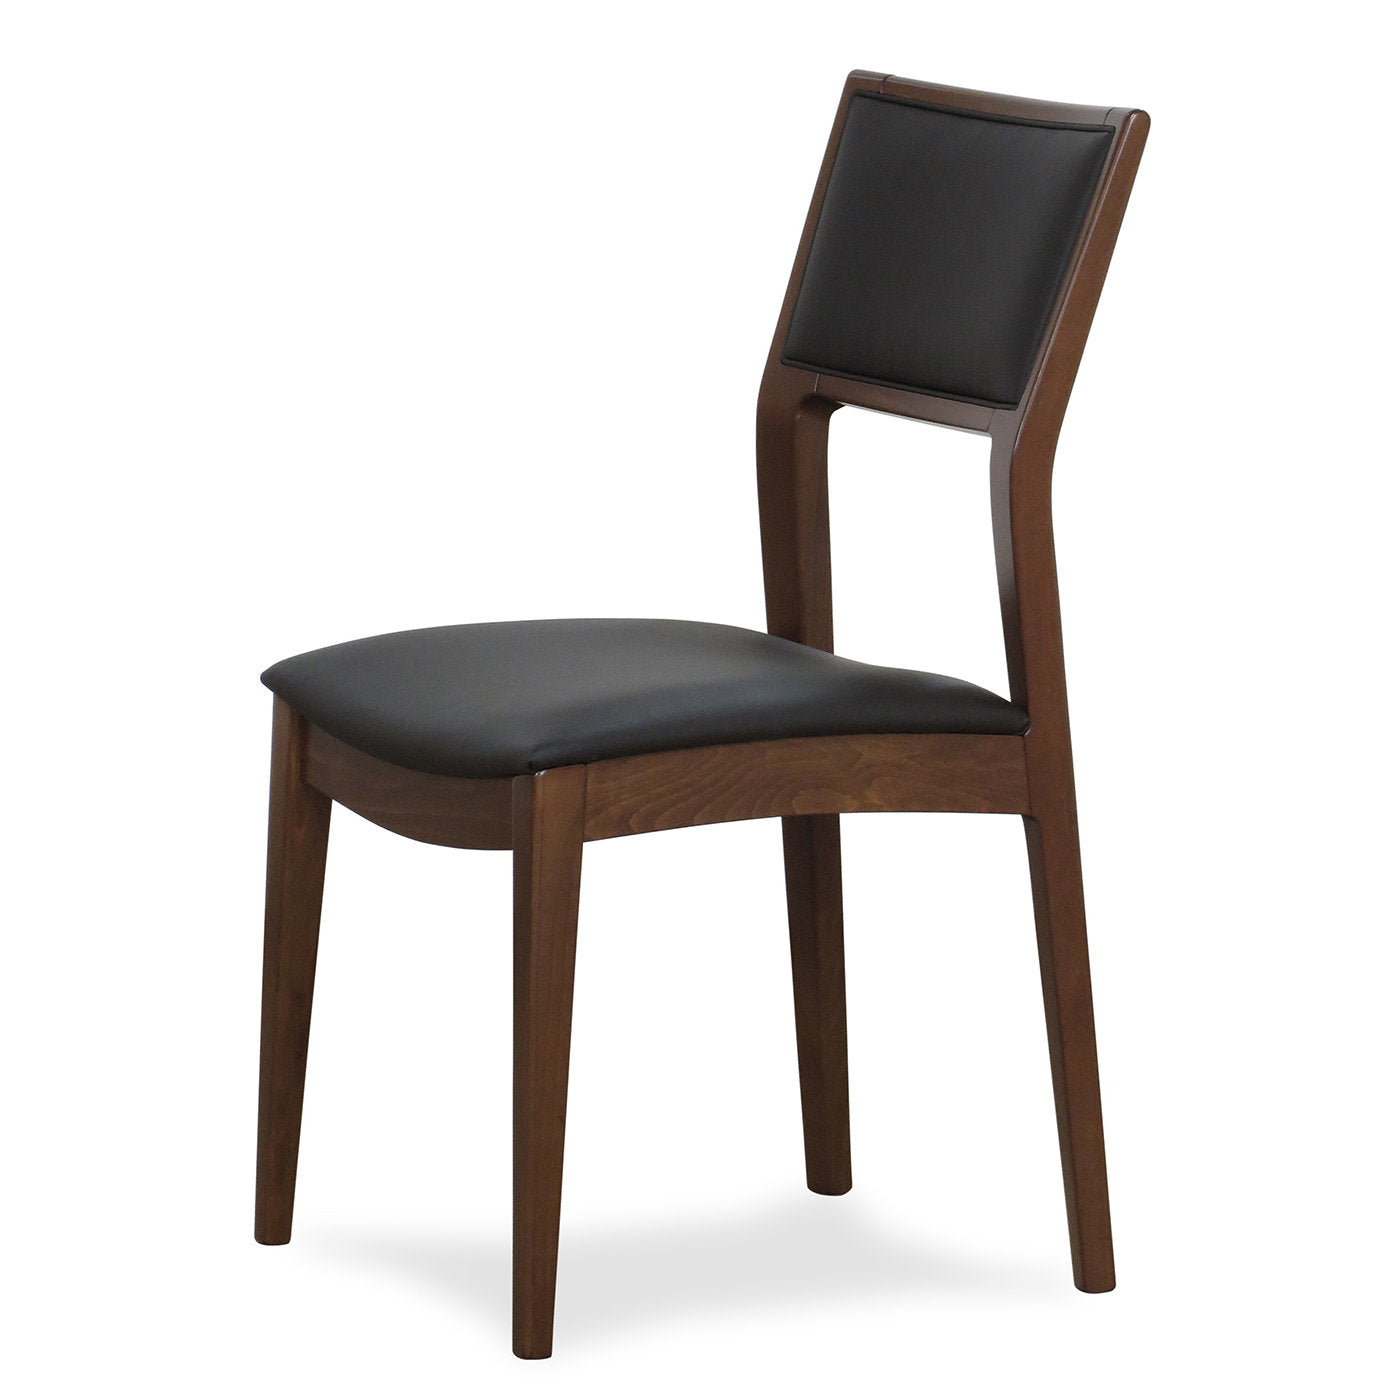 Dom-5 Set of 2 Chairs - Alternative view 1